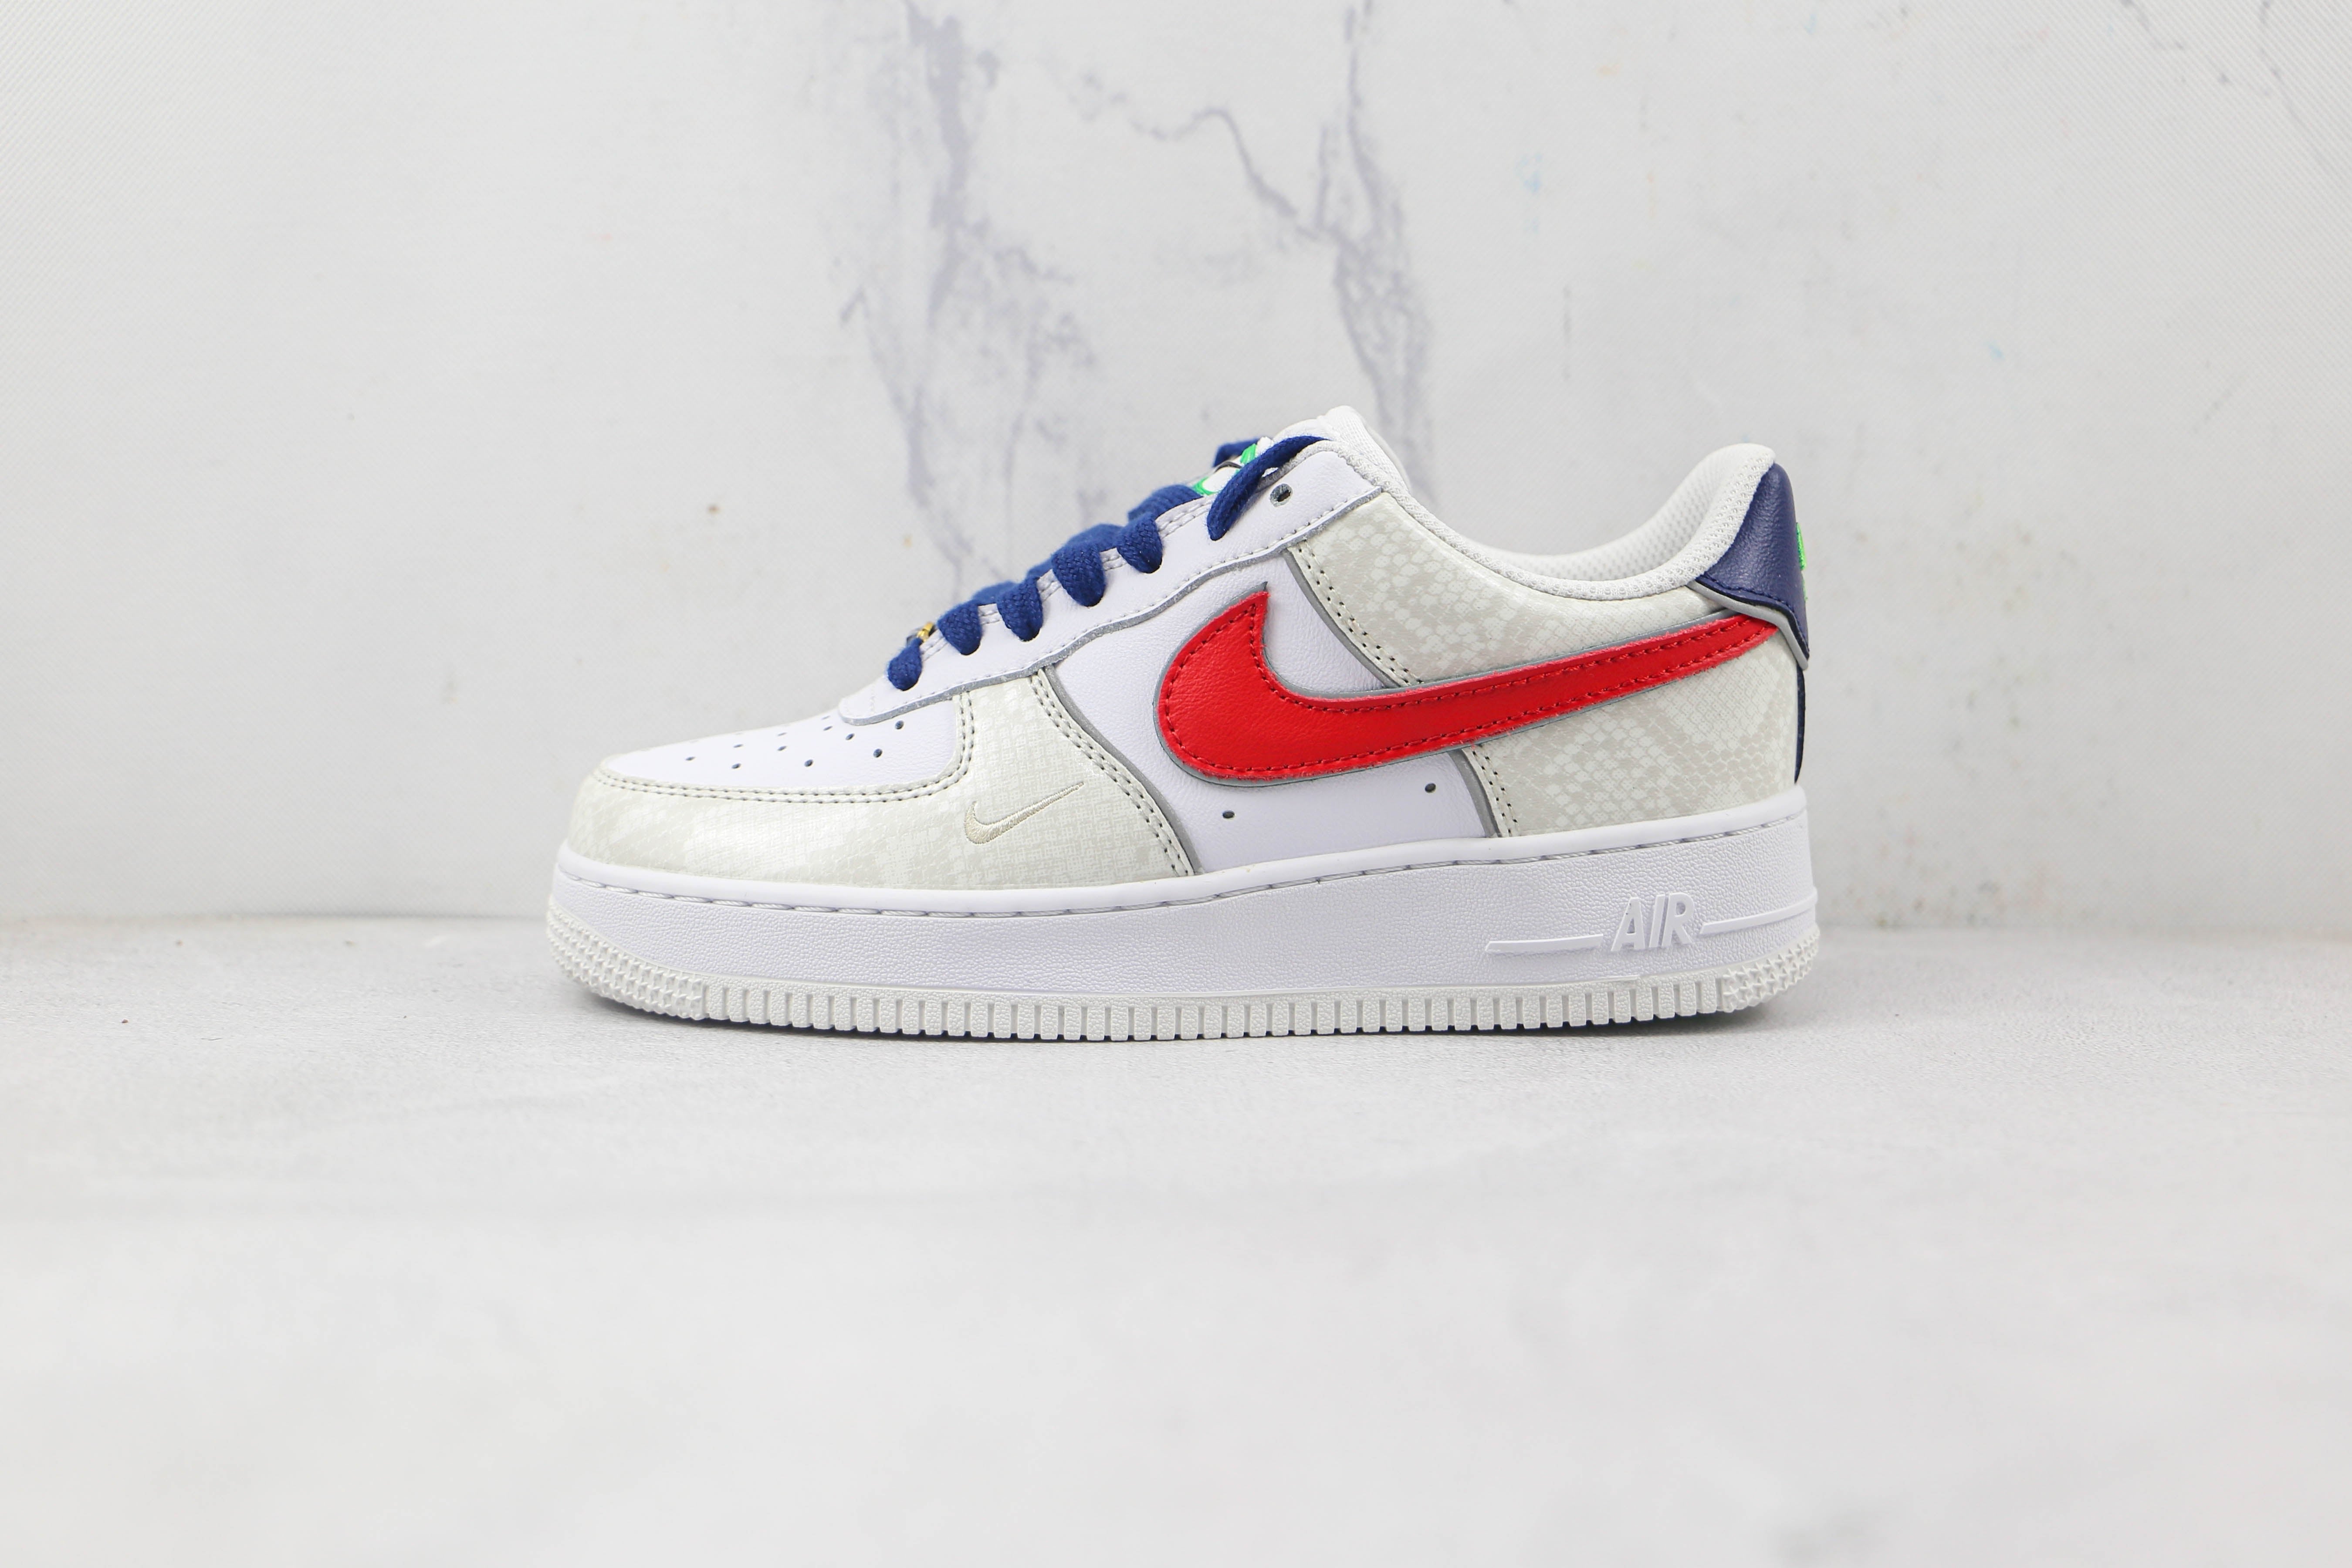 Nike Air Force 1 07 LX Just Do It White University Red Snakeskin